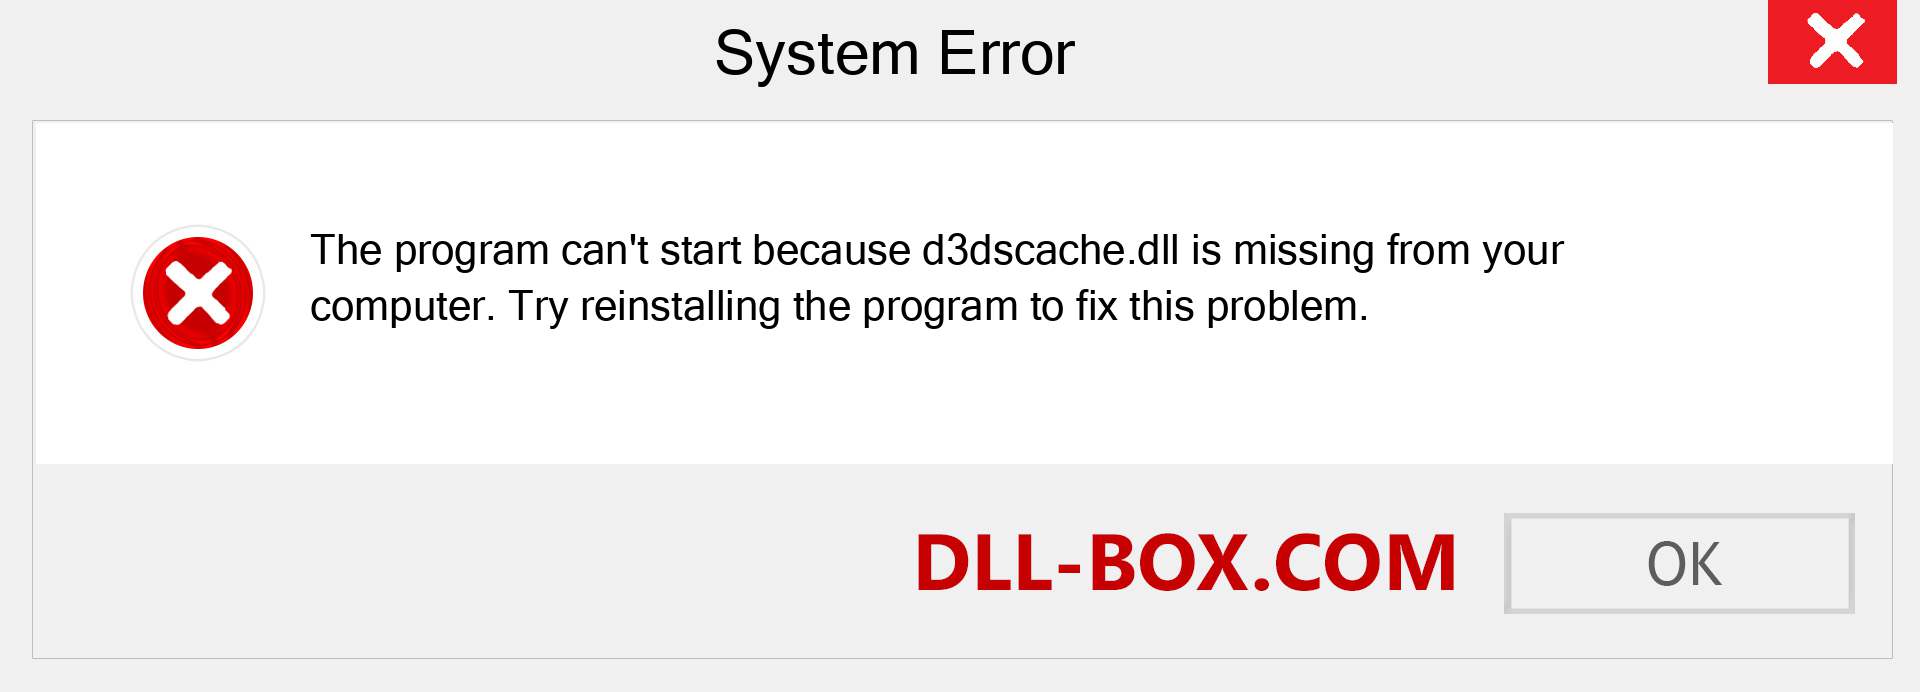  d3dscache.dll file is missing?. Download for Windows 7, 8, 10 - Fix  d3dscache dll Missing Error on Windows, photos, images